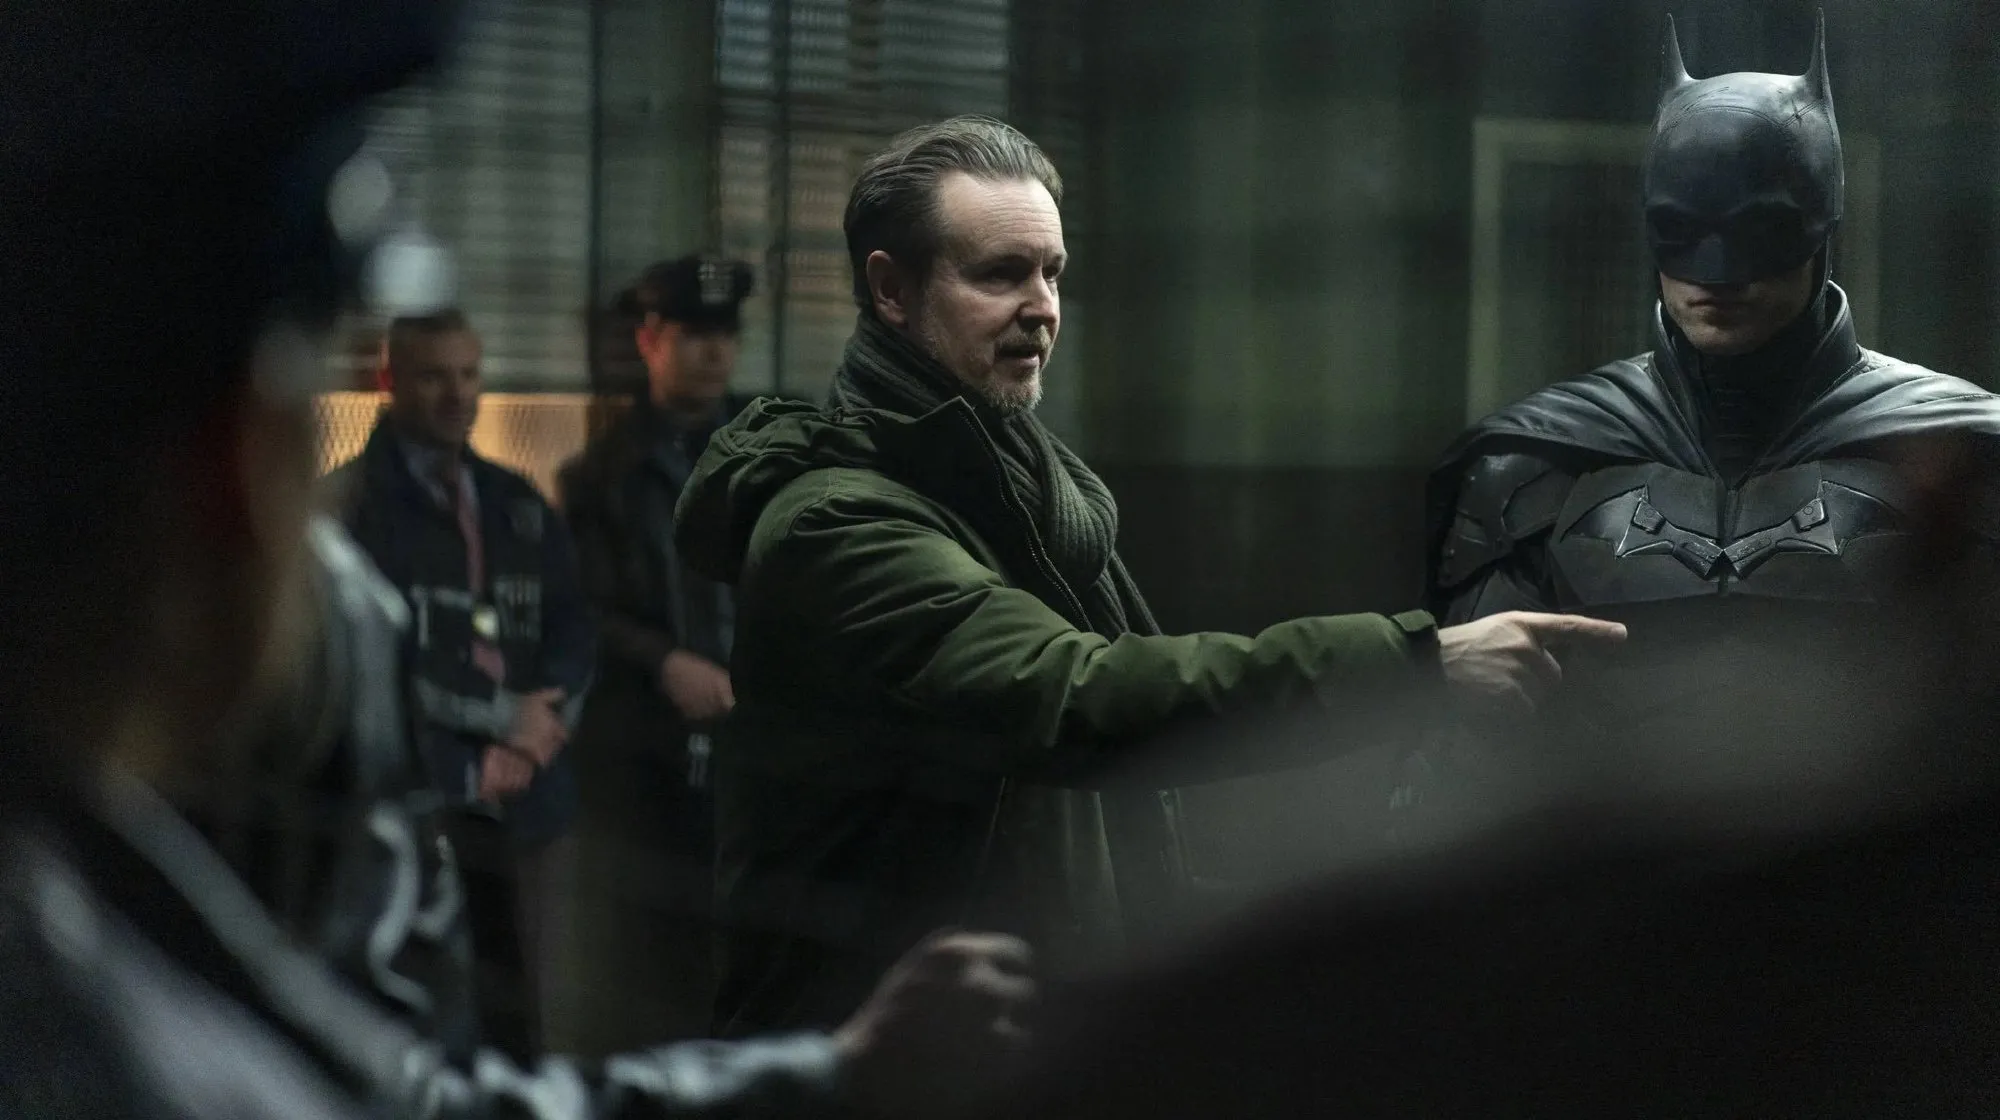 Matt Reeves signs 'overall first look deal' with Warner Bros. | FMV6